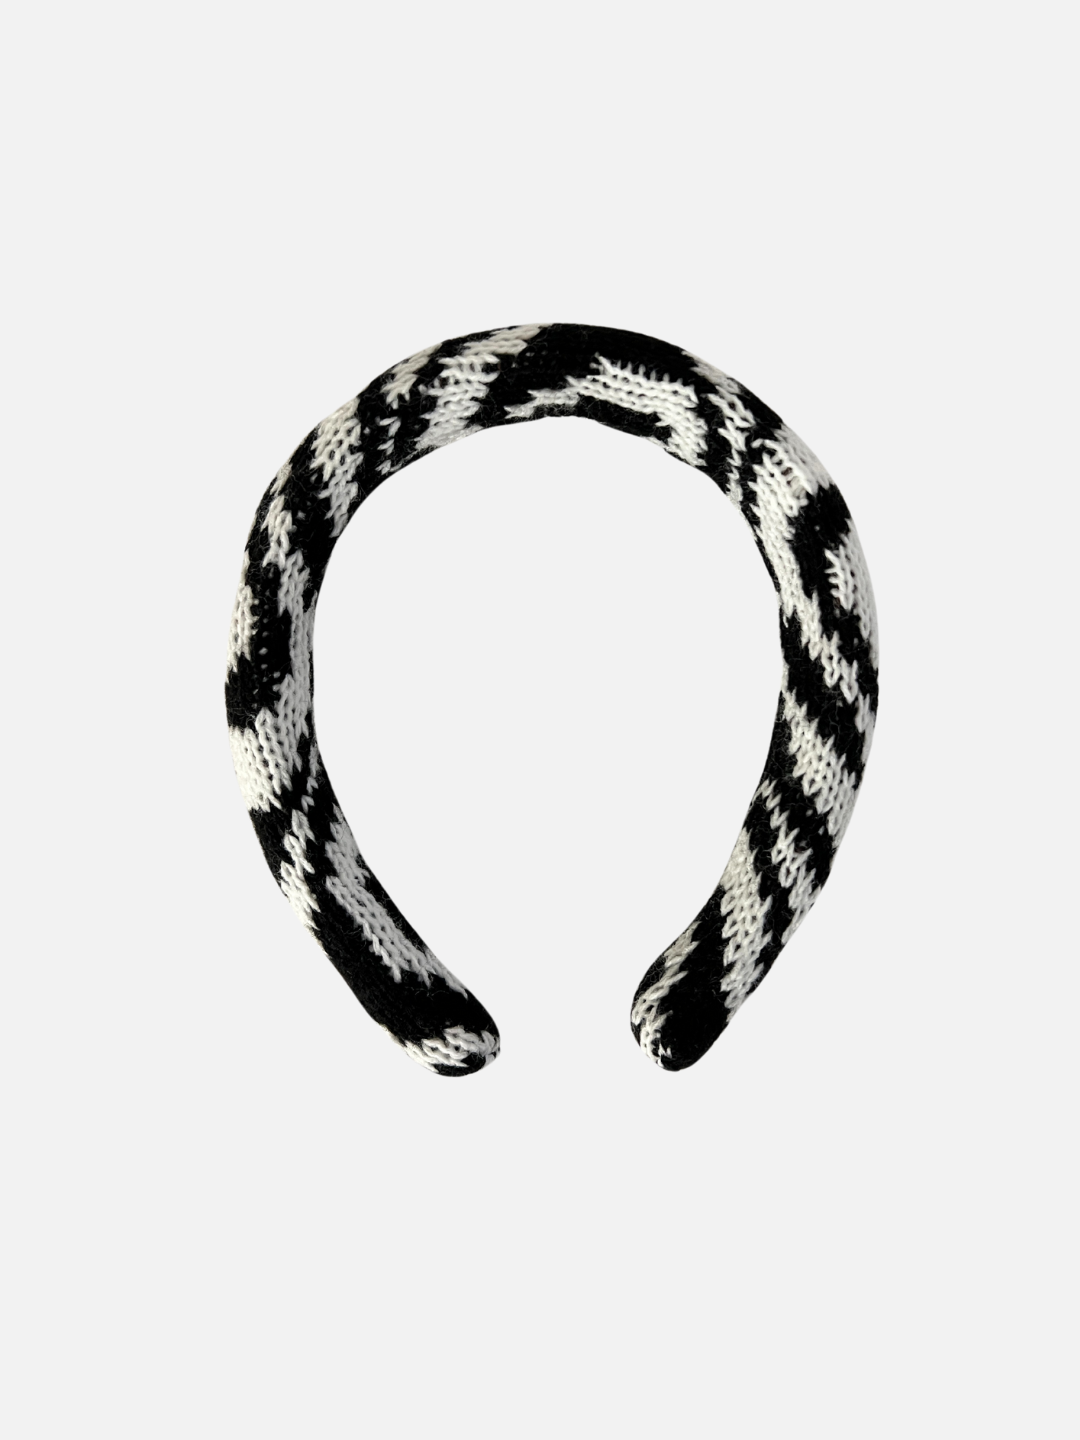 A kids' knitted headband in swirls of pale black and white